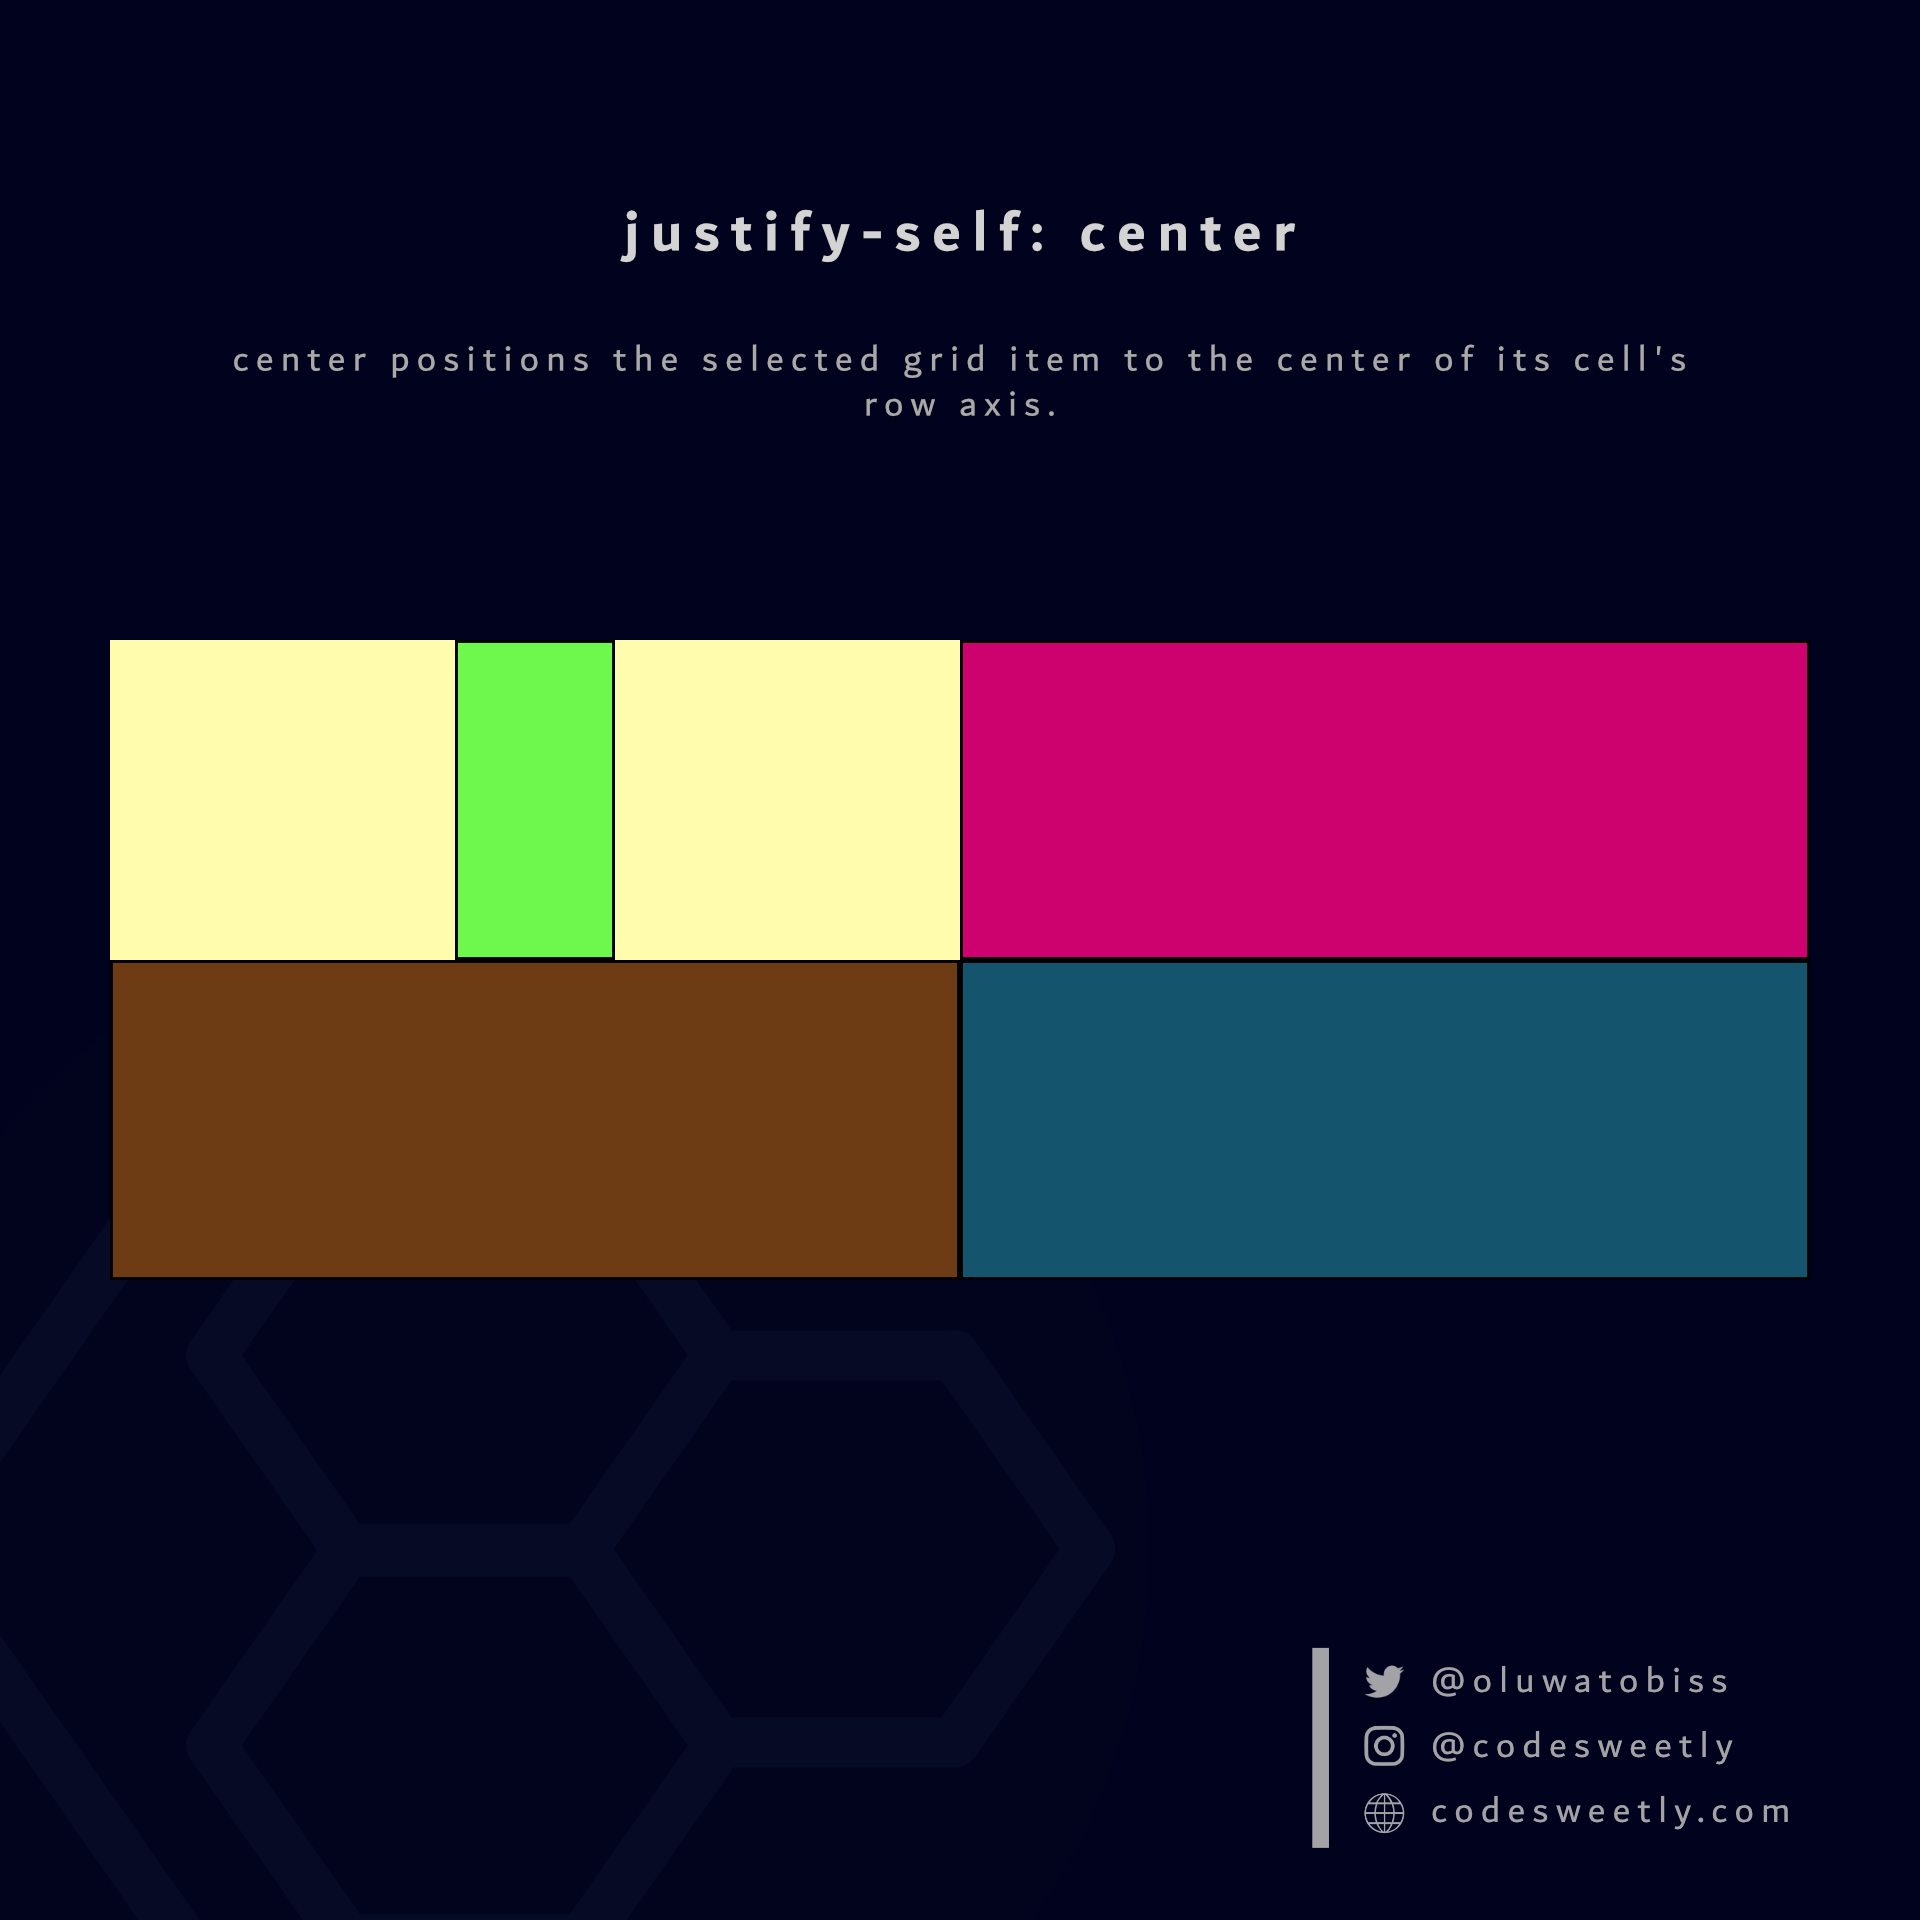 justify-self's center value positions the selected grid item to its cell's center